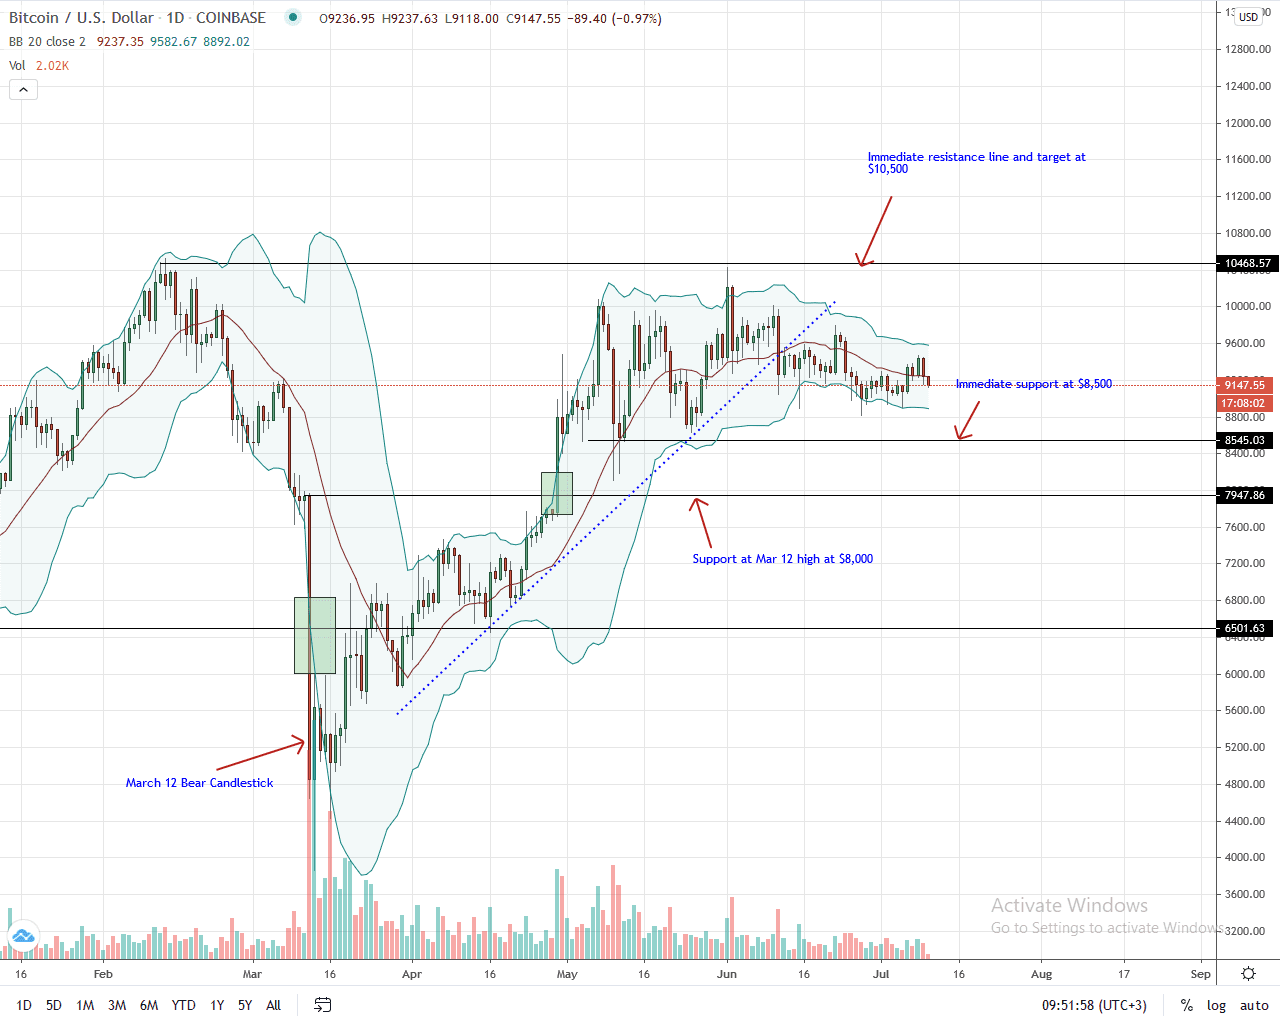 Bitcoin Daily Chart for July 10, 2020